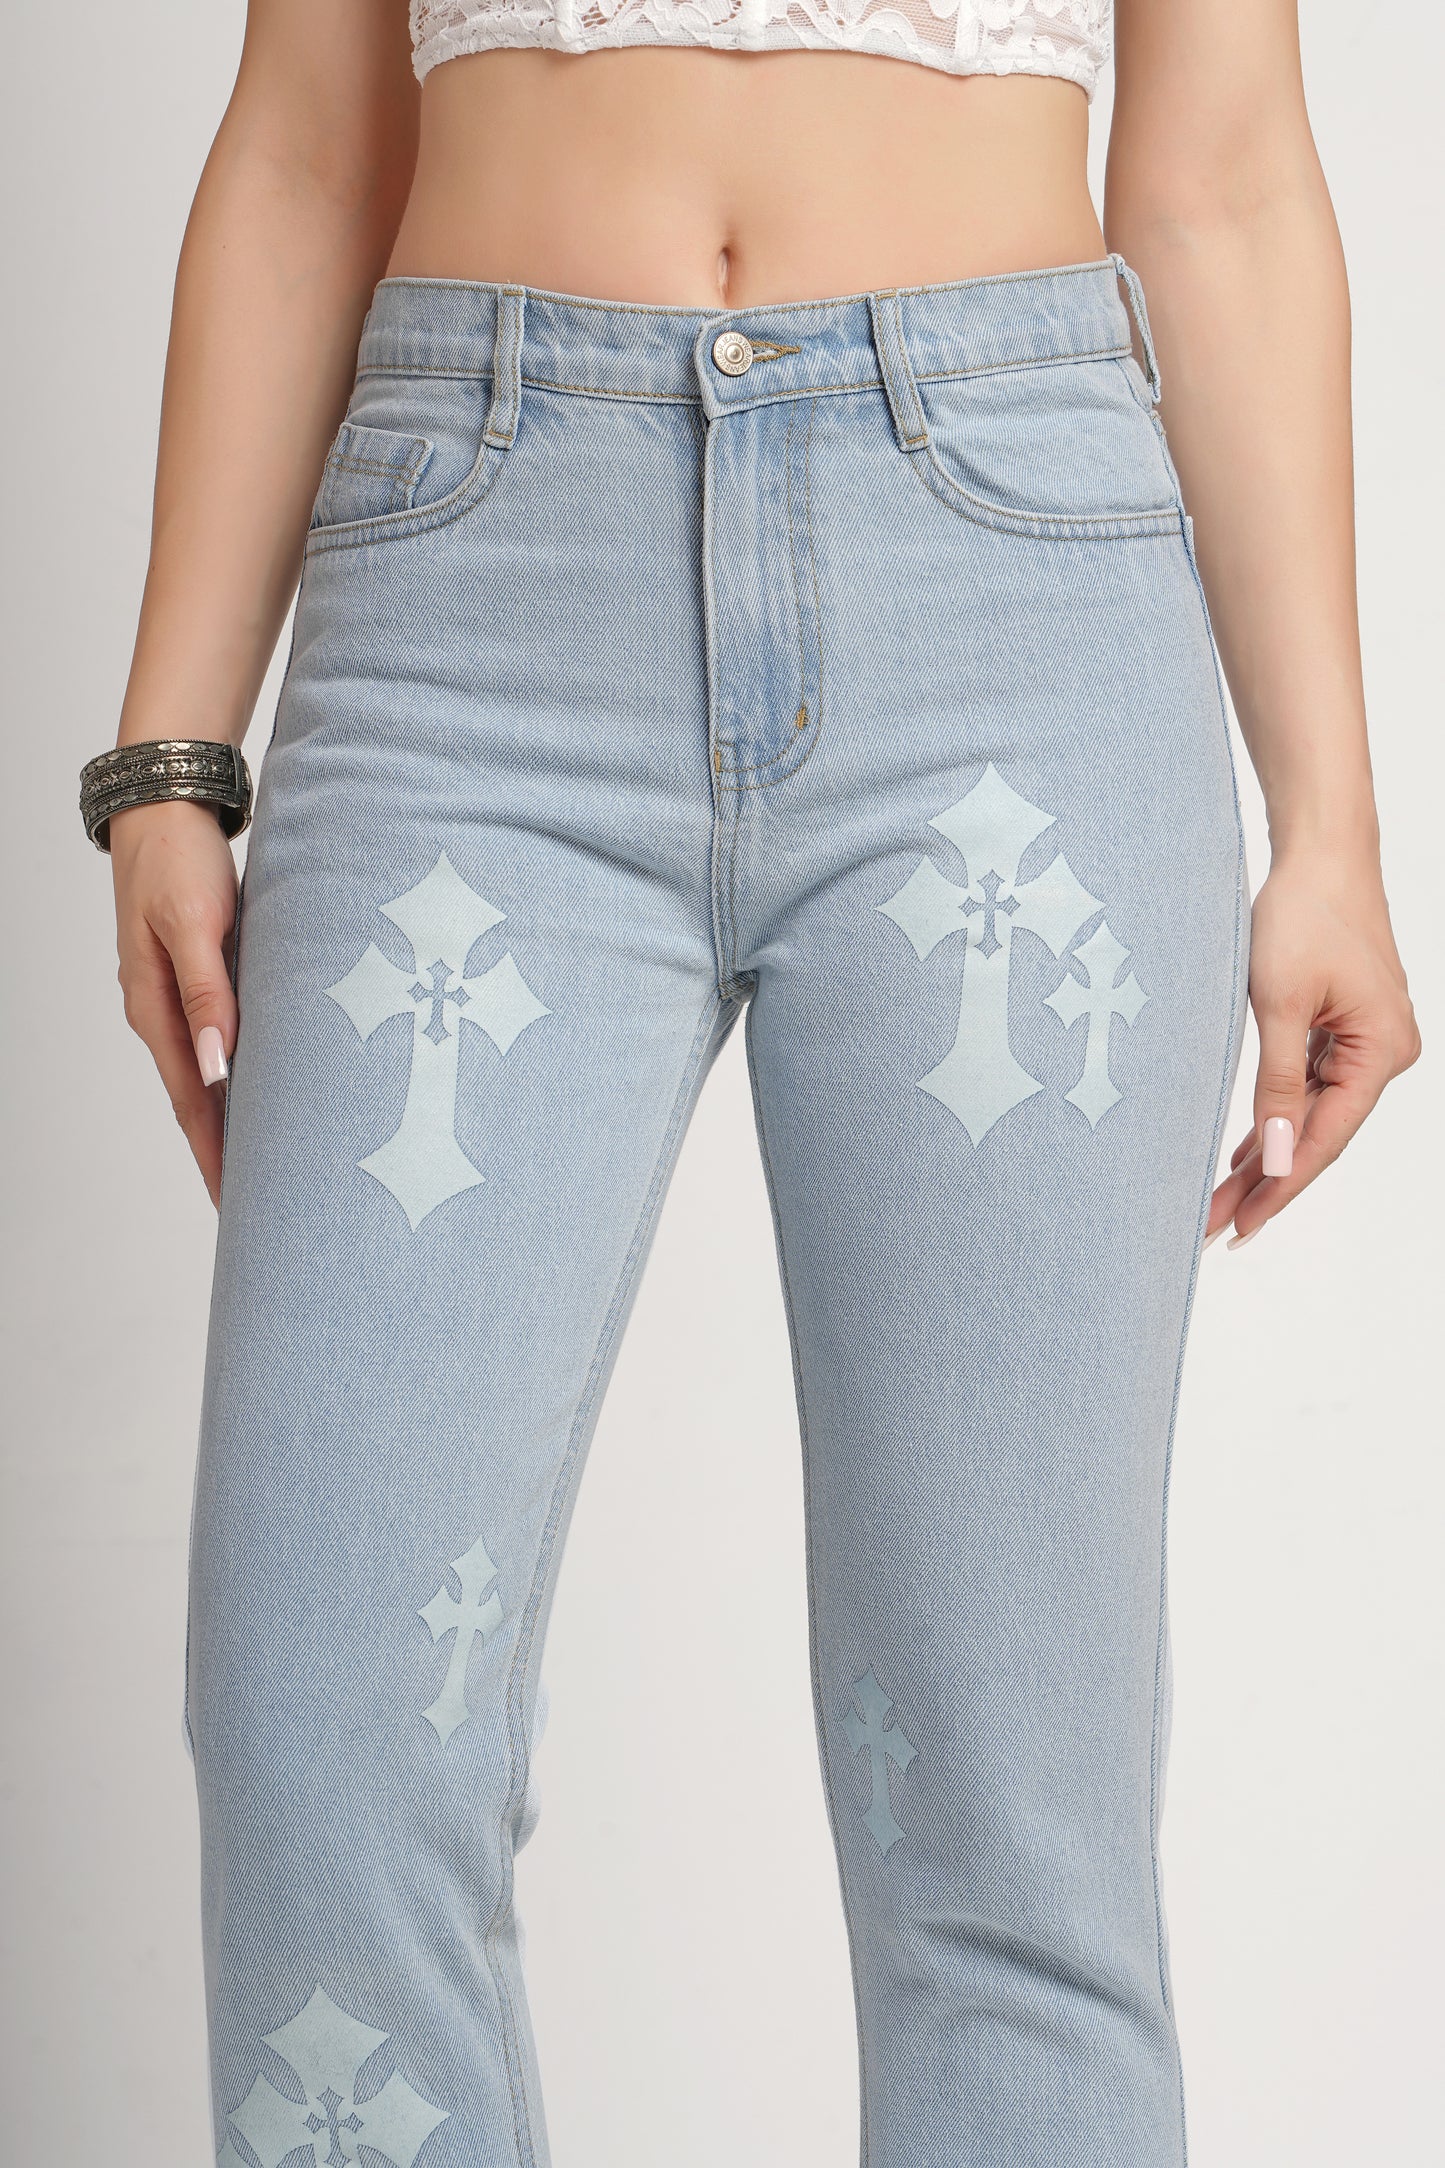 MeQueen Women's Sky Blue Fit Printed Denim Jeans